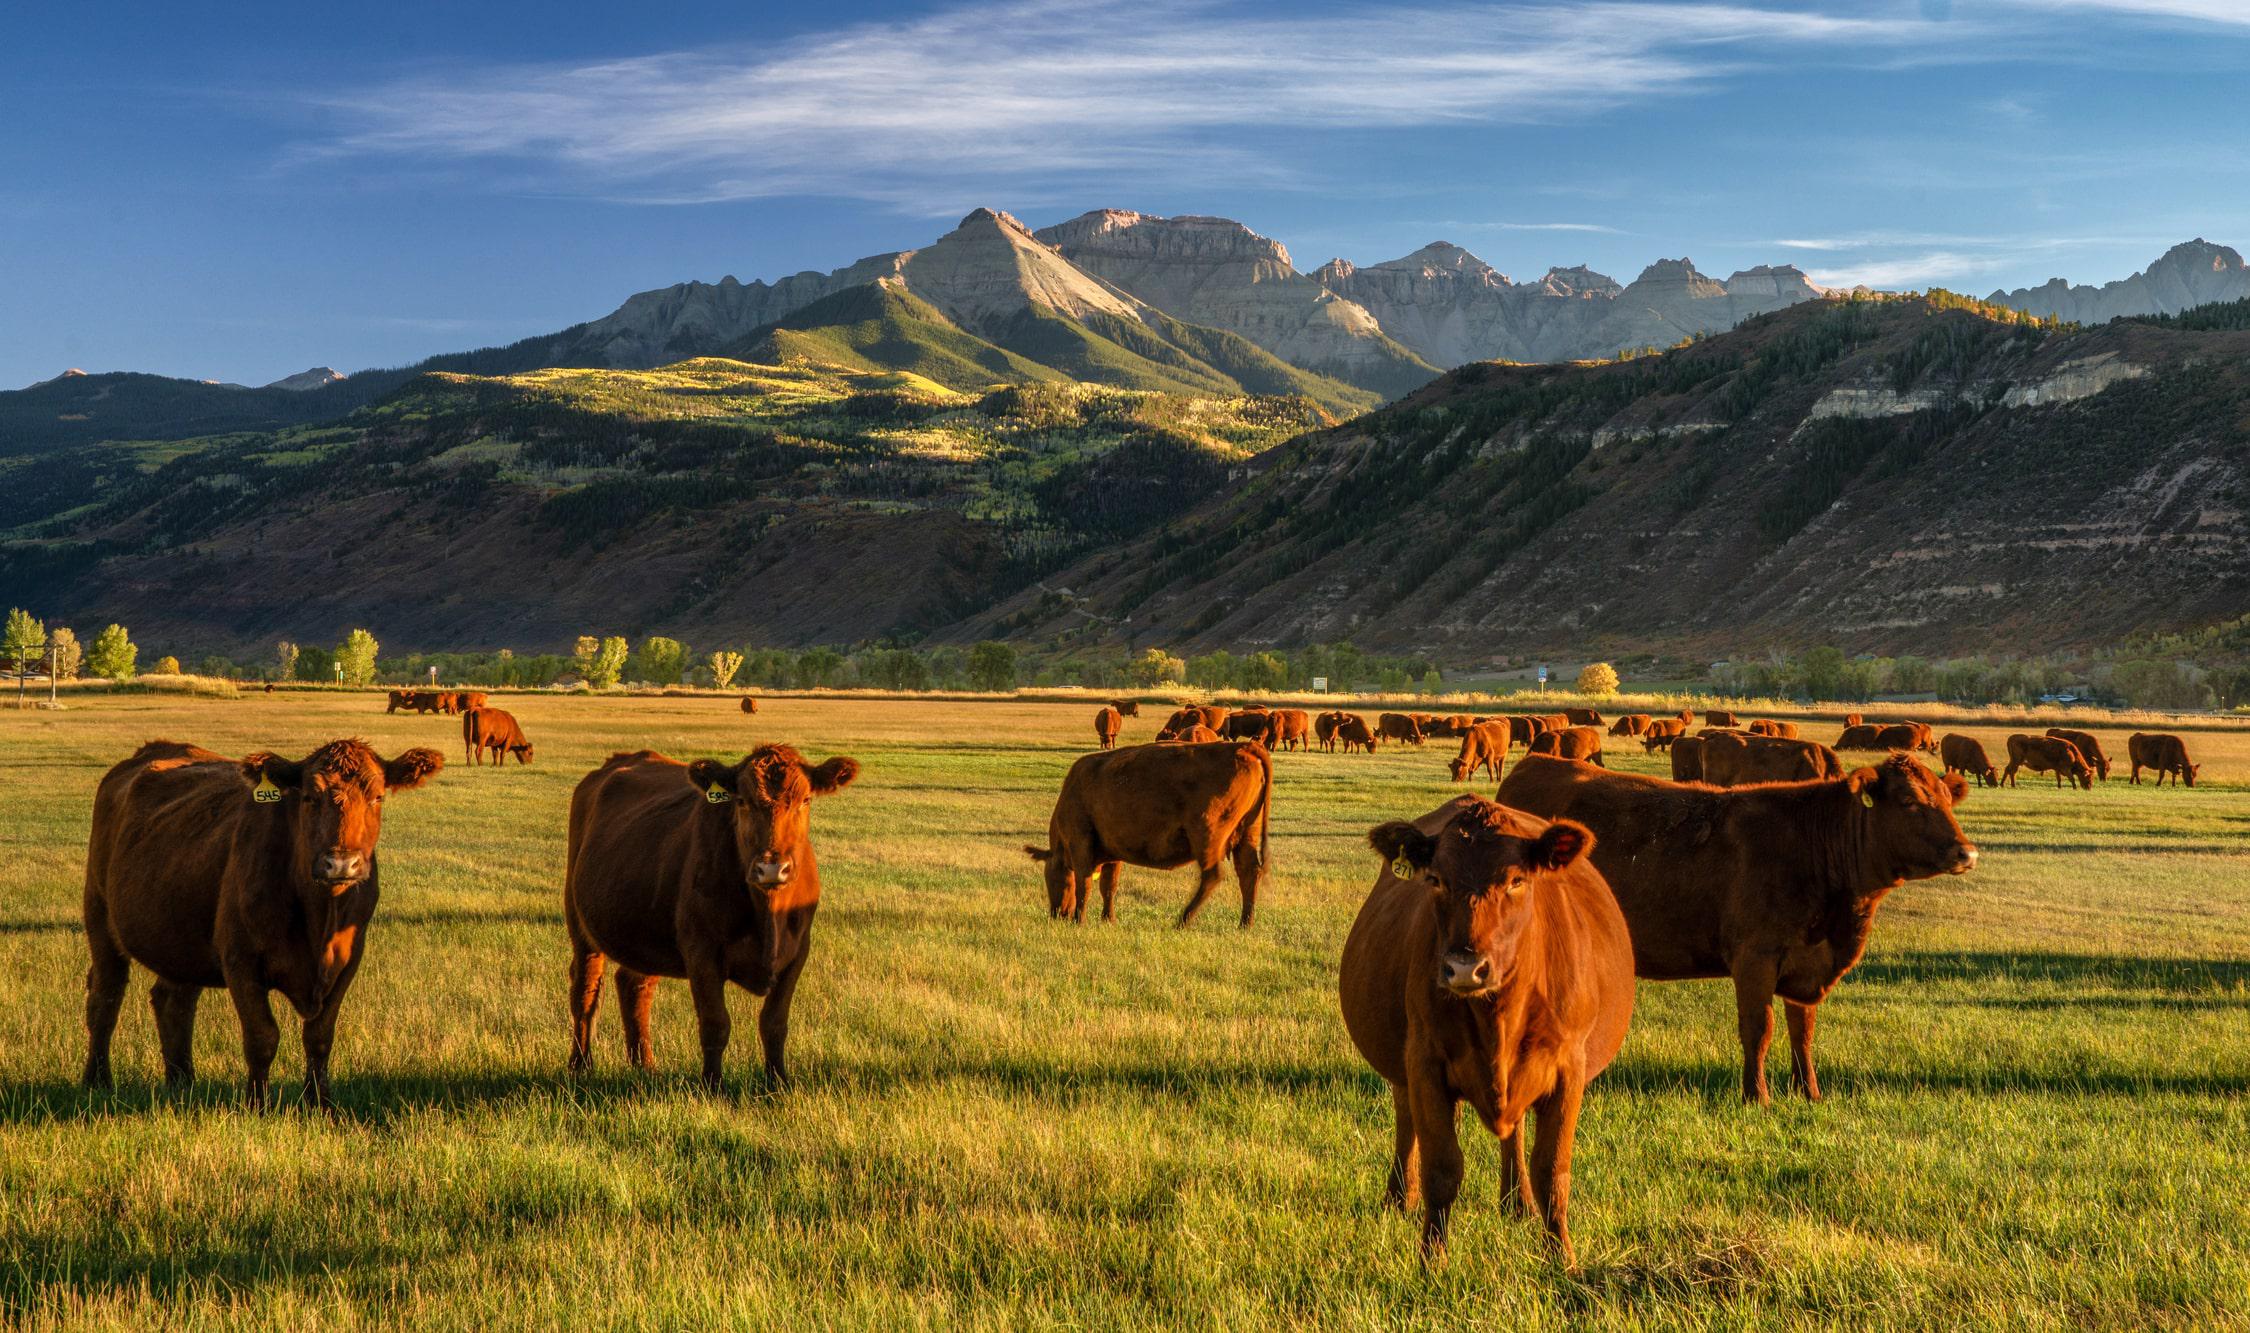 Cattle on a Colorado farm with a moutain range in the background